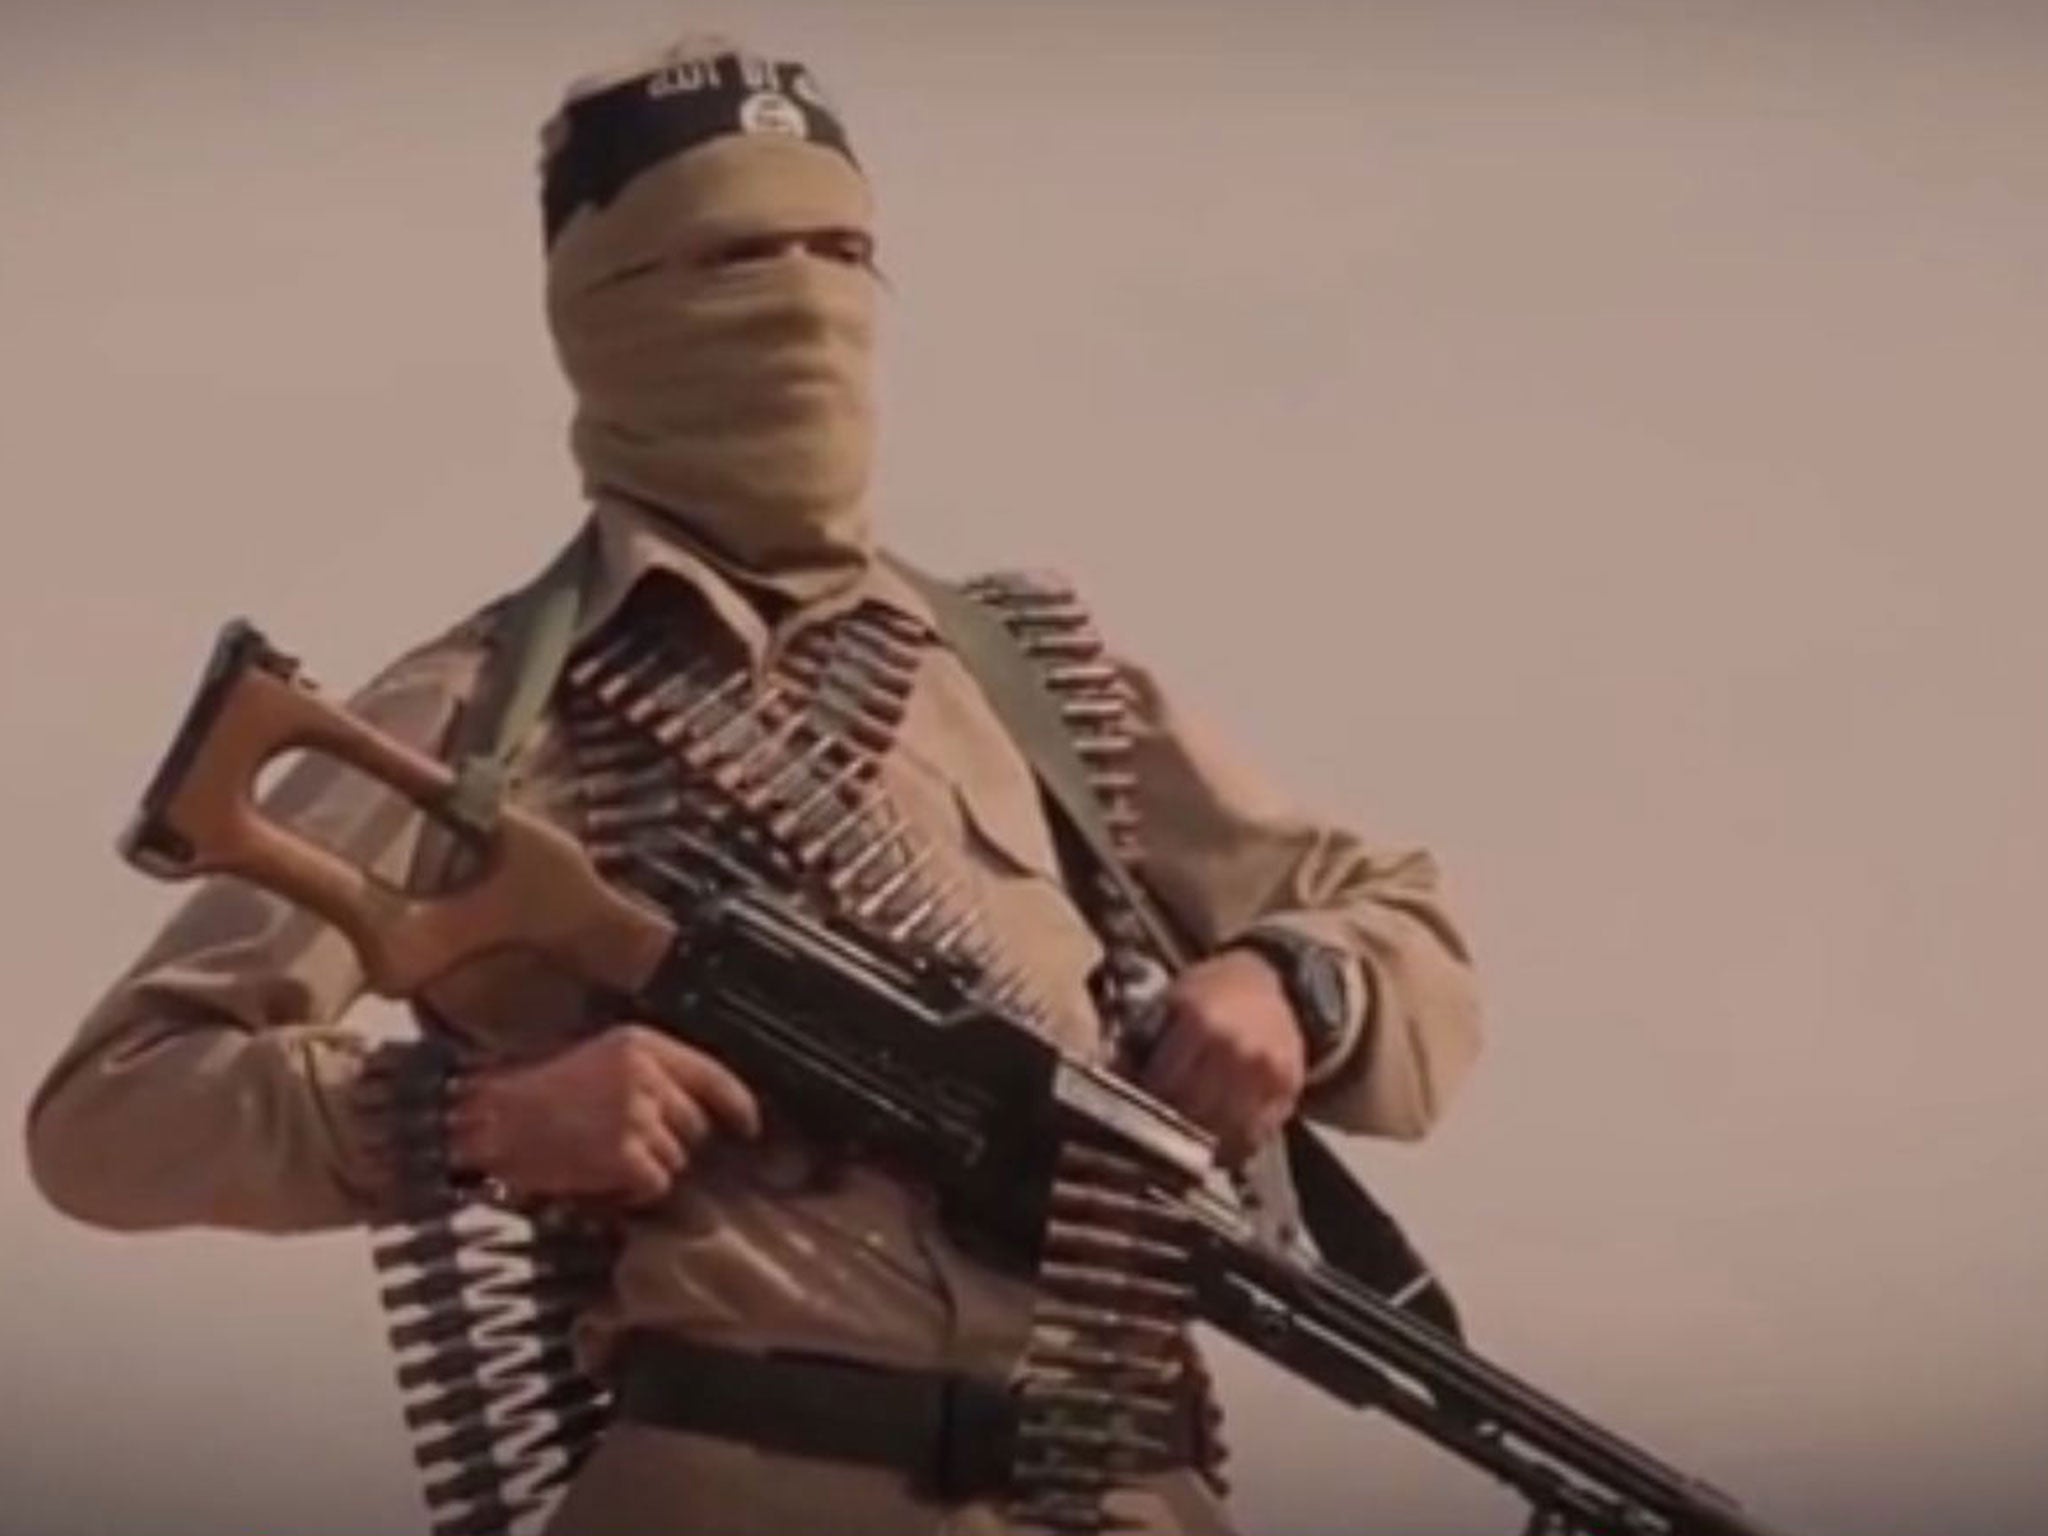 An Isis fighter poses with a light machine gun